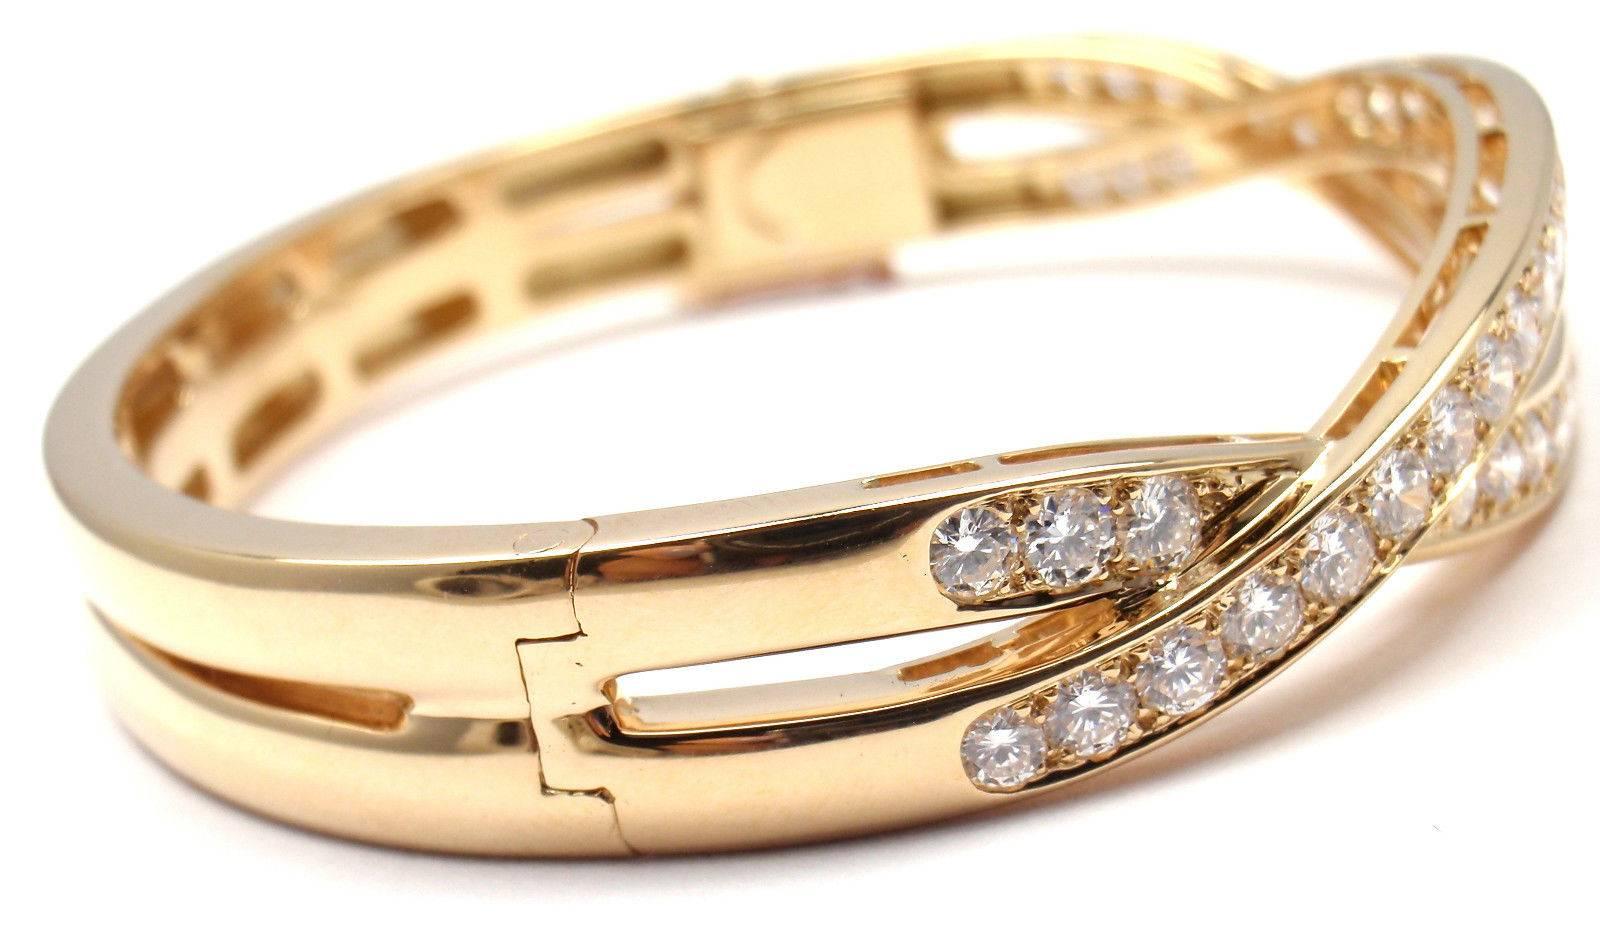 18k Yellow Gold Diamond Bangle Bracelet by Van Cleef & Arpels. 
With 50 brilliant round cut diamond VVS1 clarity, E color
Total weight approx. 5ct

Details:
Length: 7